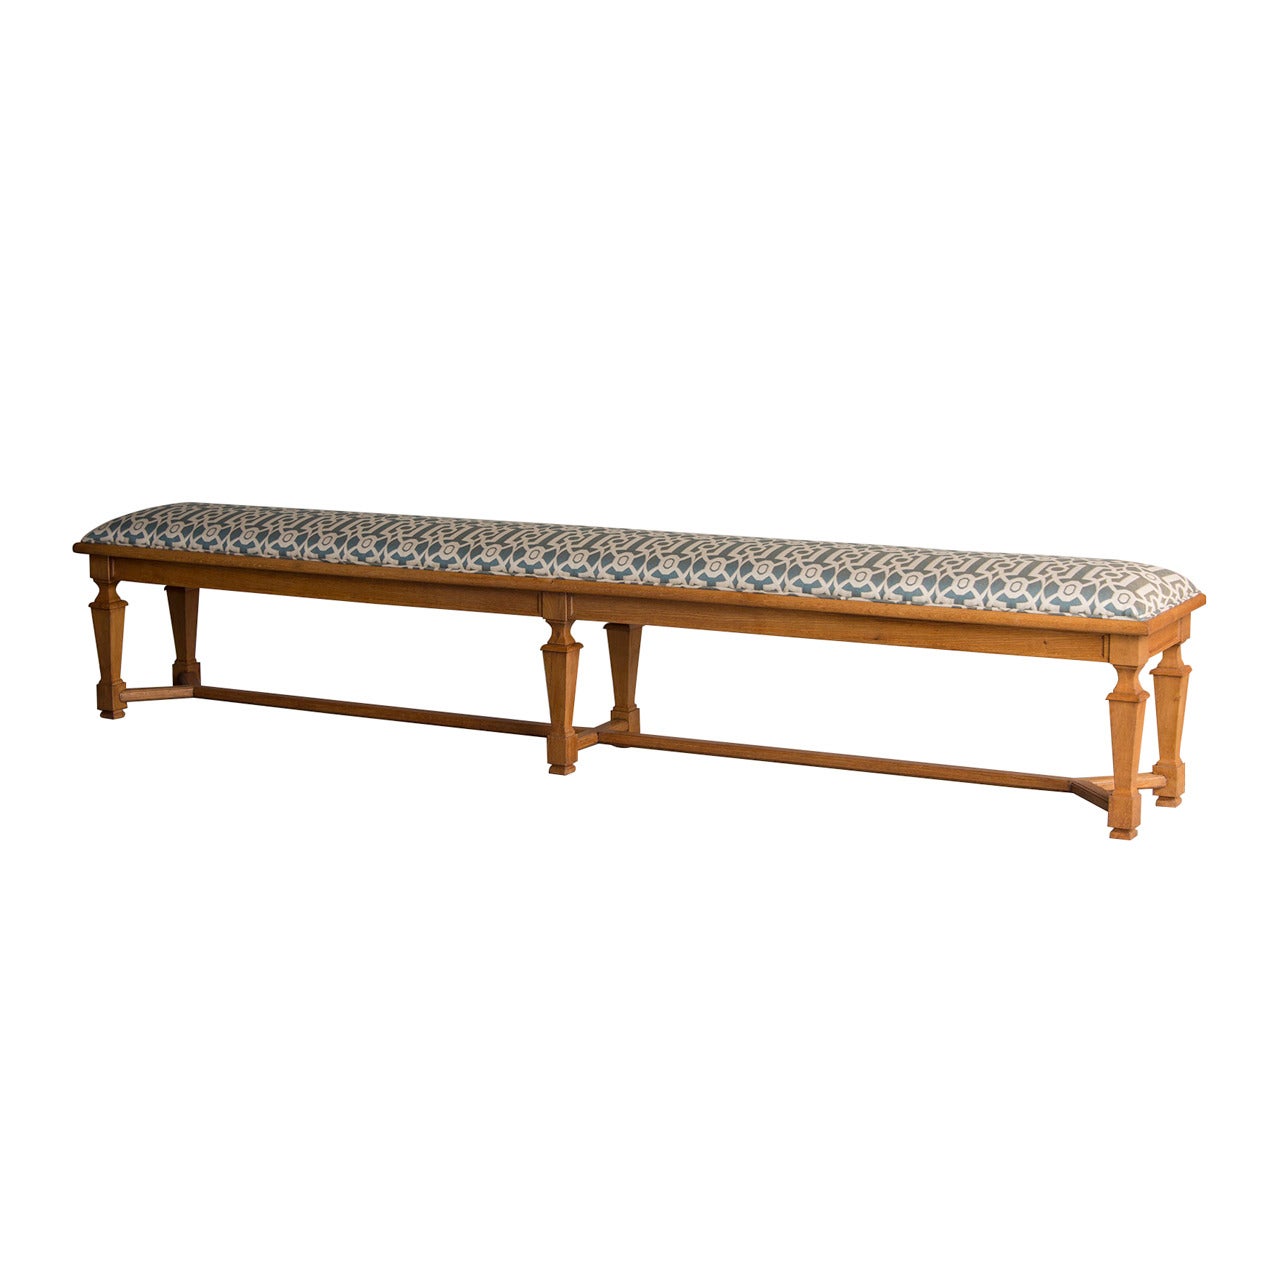 Antique French Solid Oak Long Bench, Architecturally Inspired, circa 1880